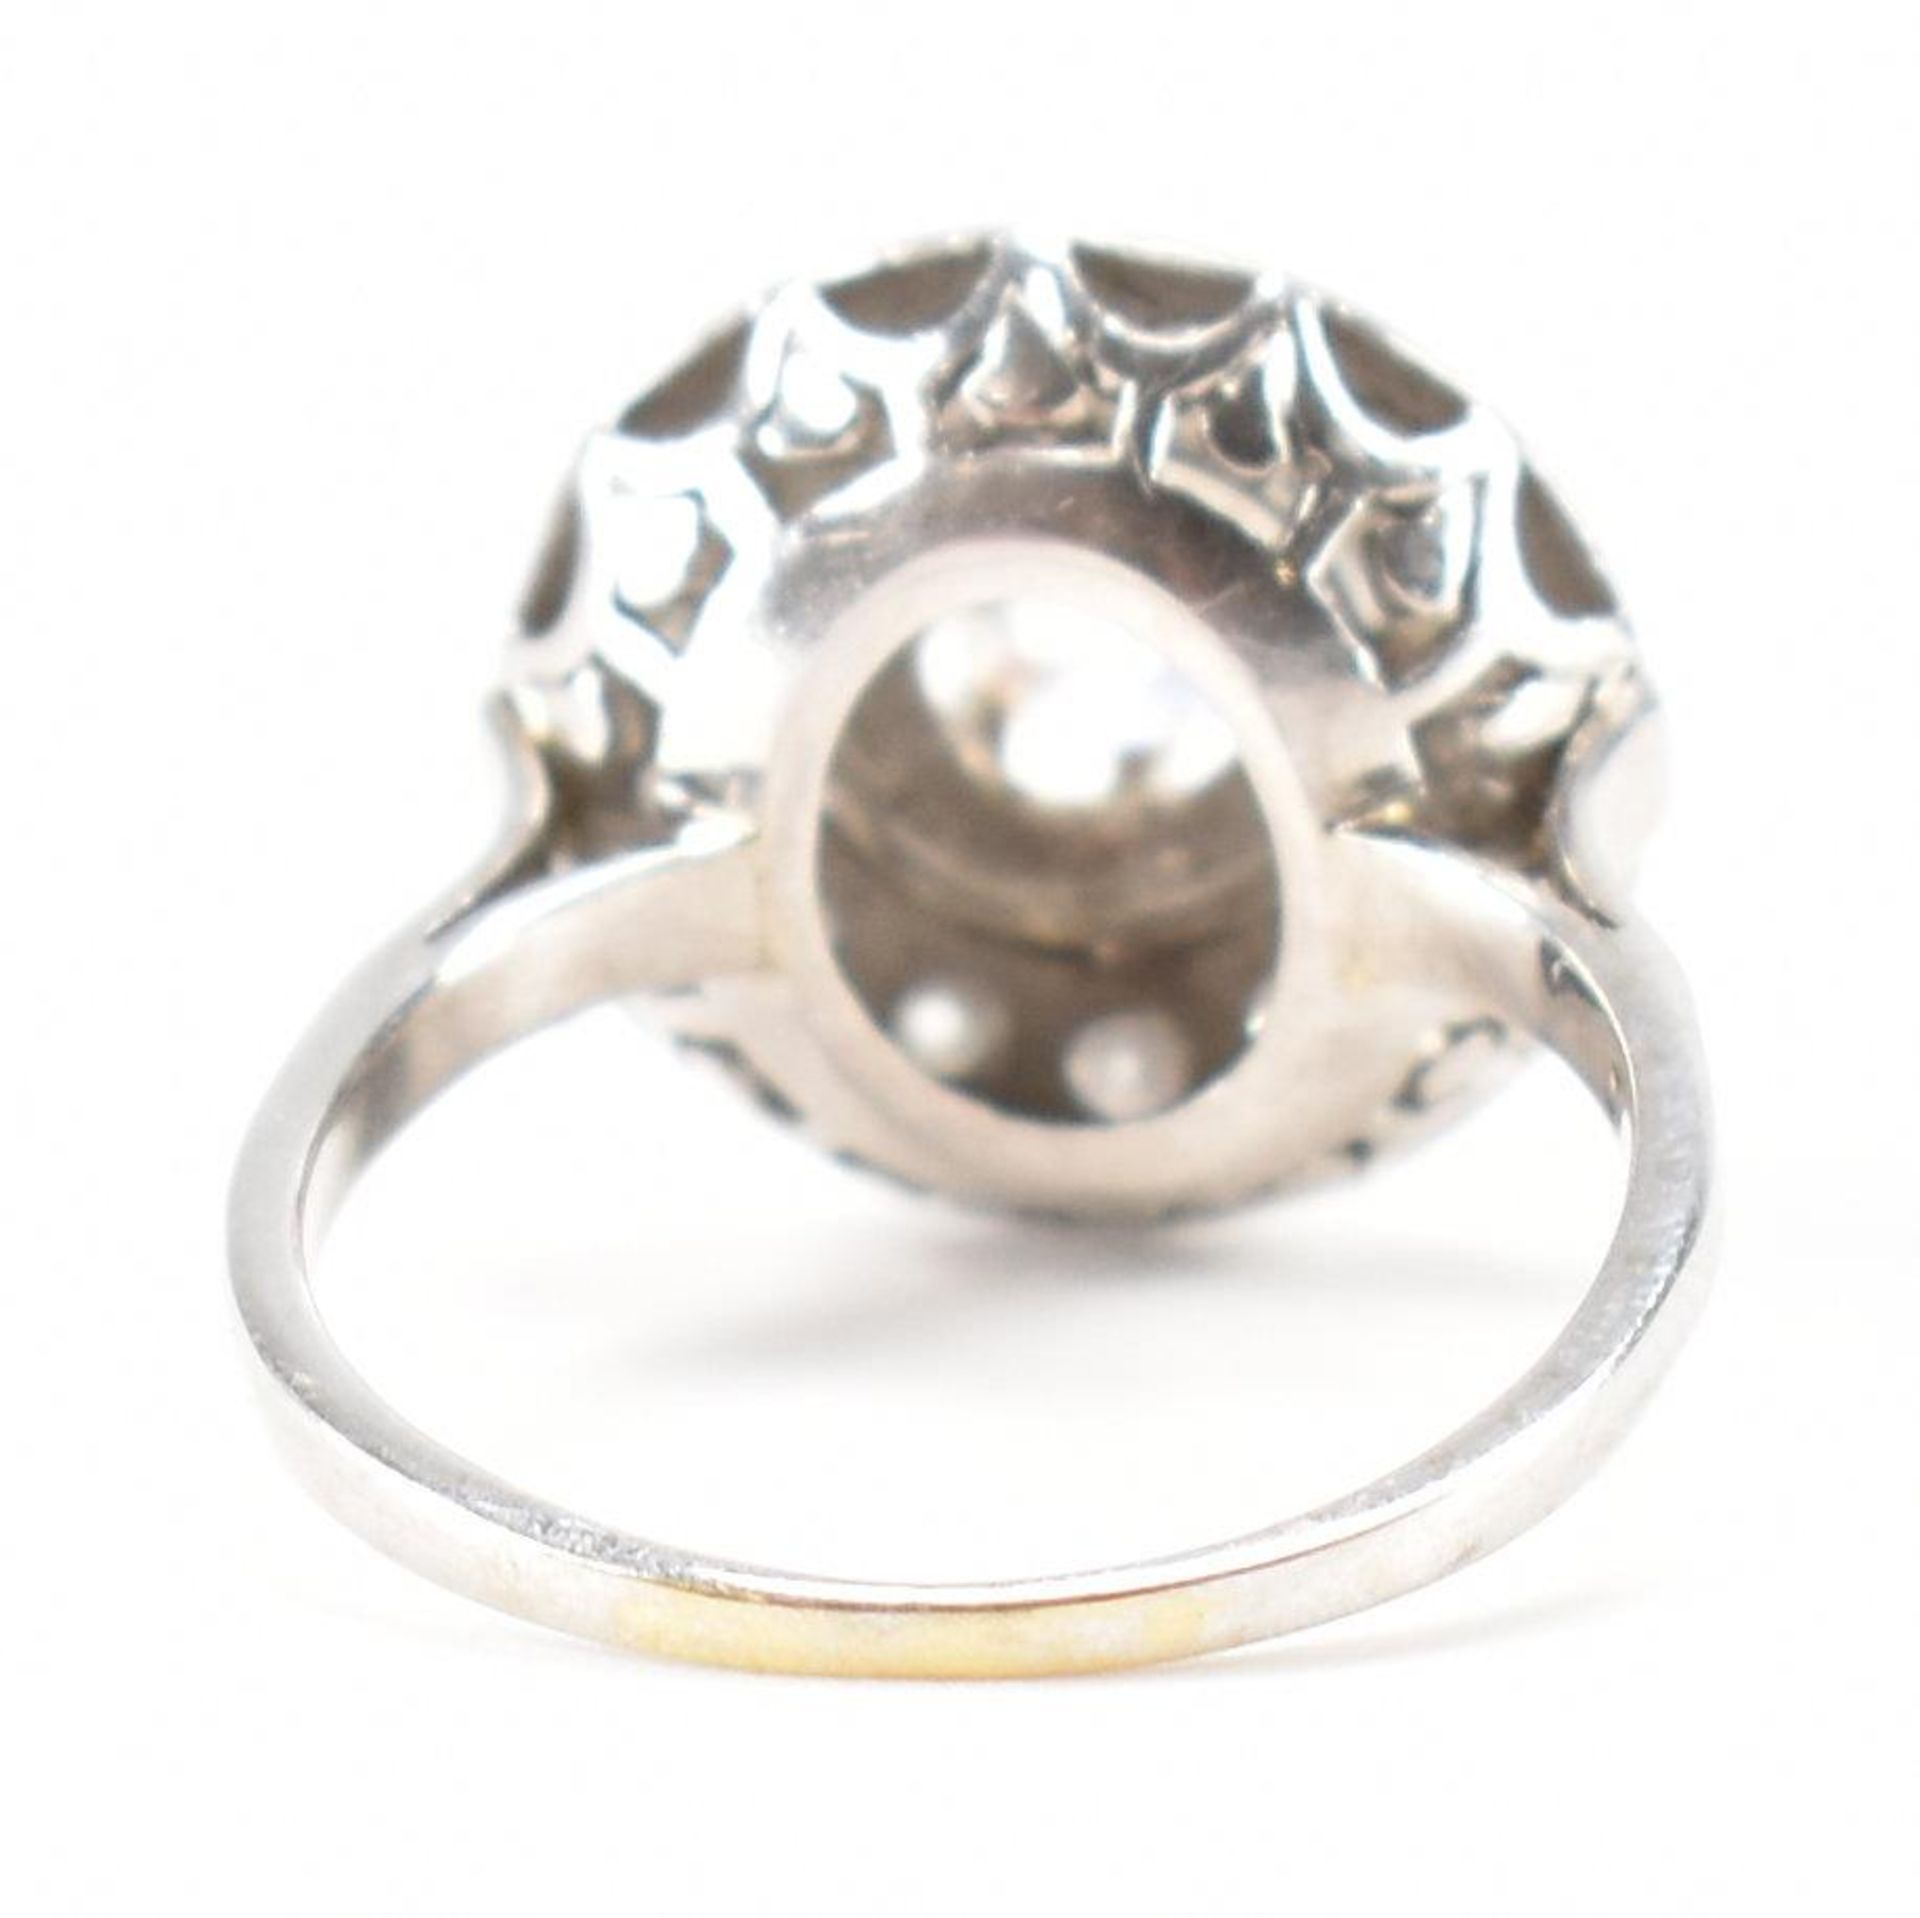 FRENCH ART DECO DIAMOND TARGET RING - Image 4 of 8